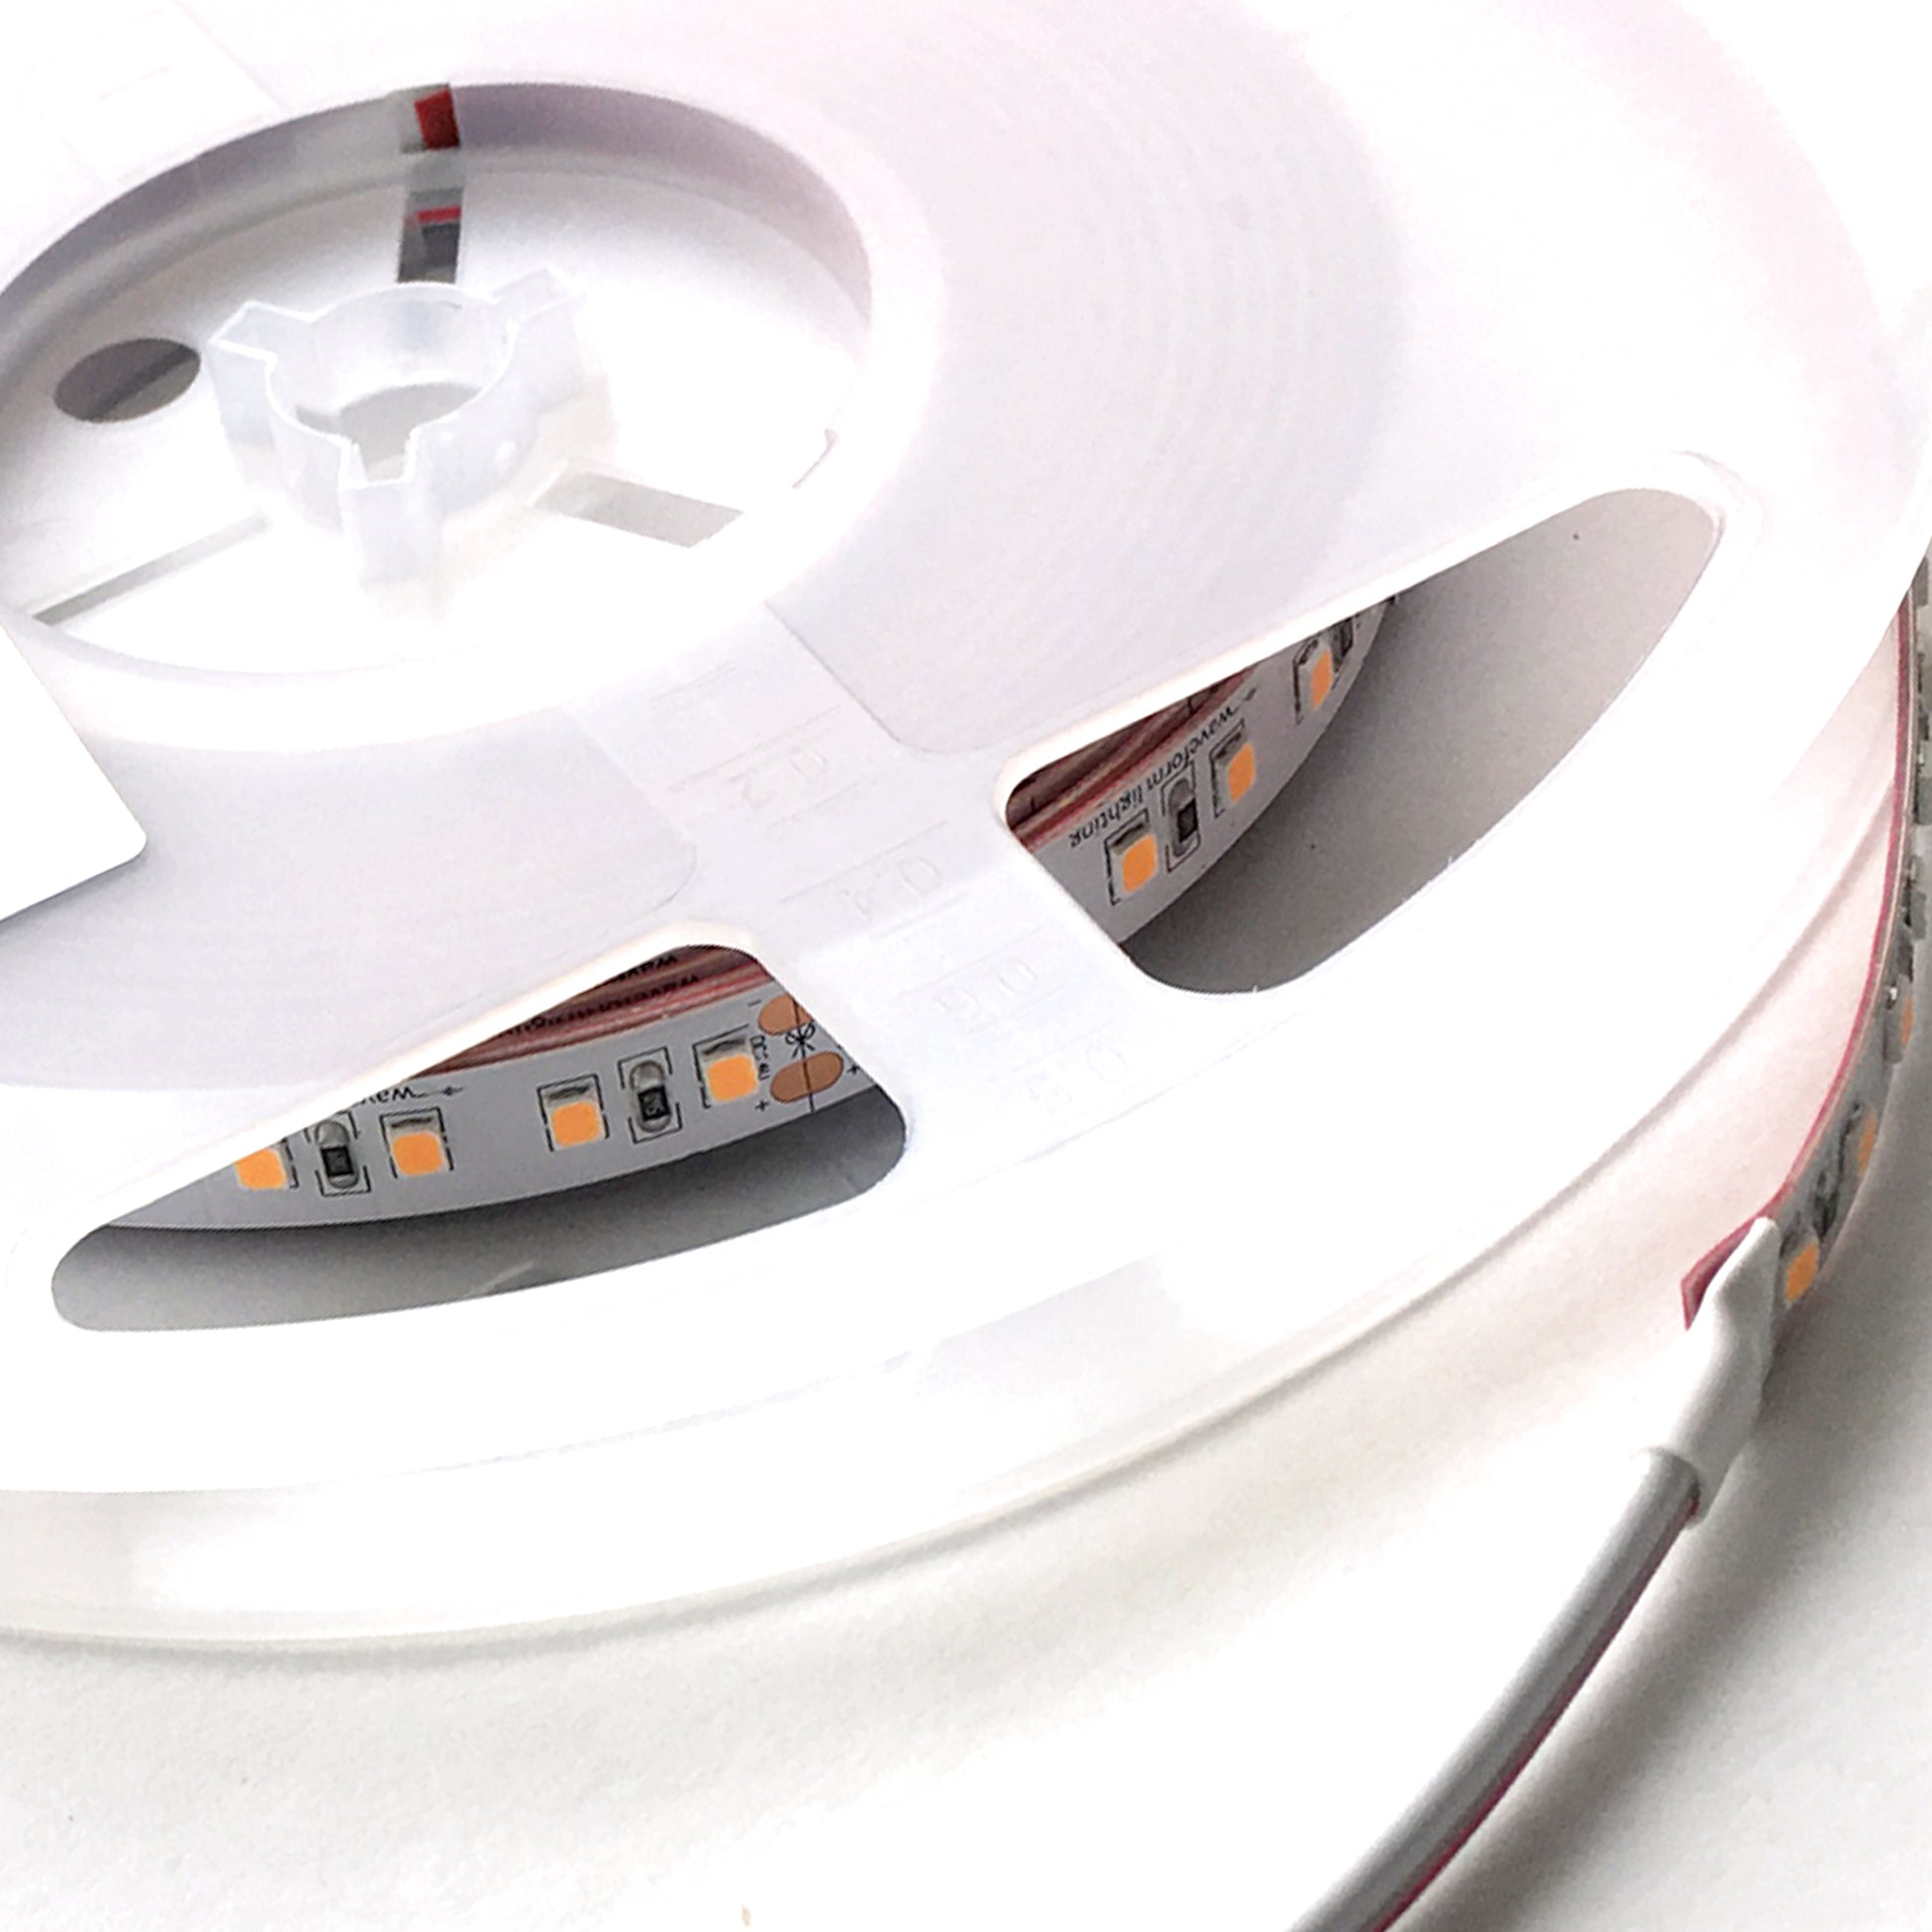 CENTRIC DAYLIGHT™ LED Strip for Commercial Retail Waveform